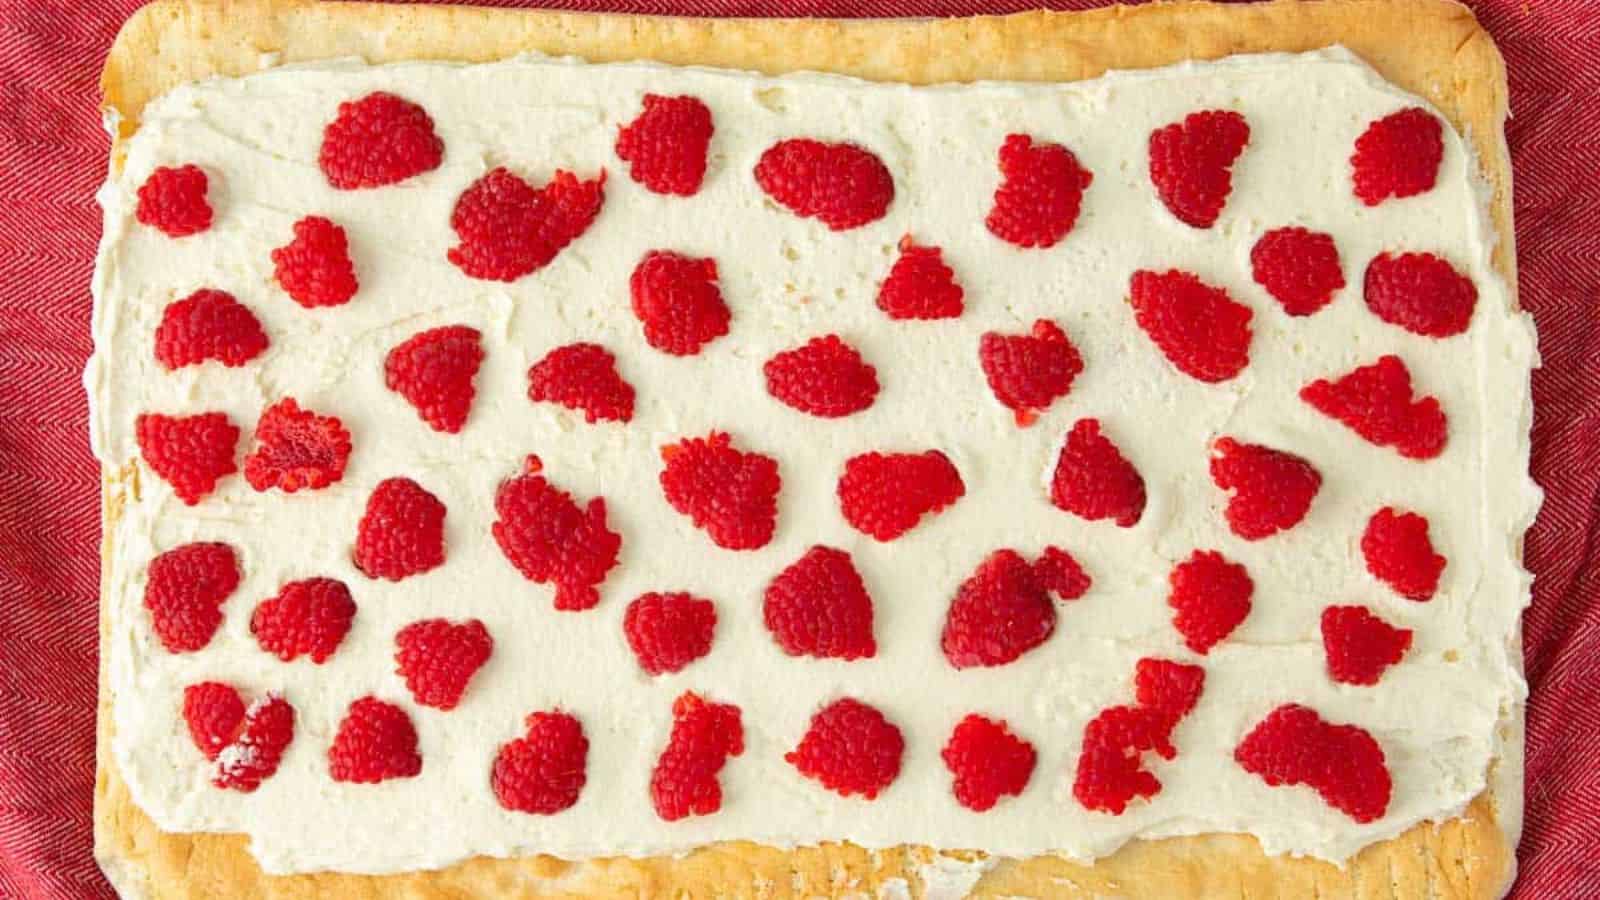 Raspberries filling spread on a raspberry pastry displayed on a cloth cover table. 